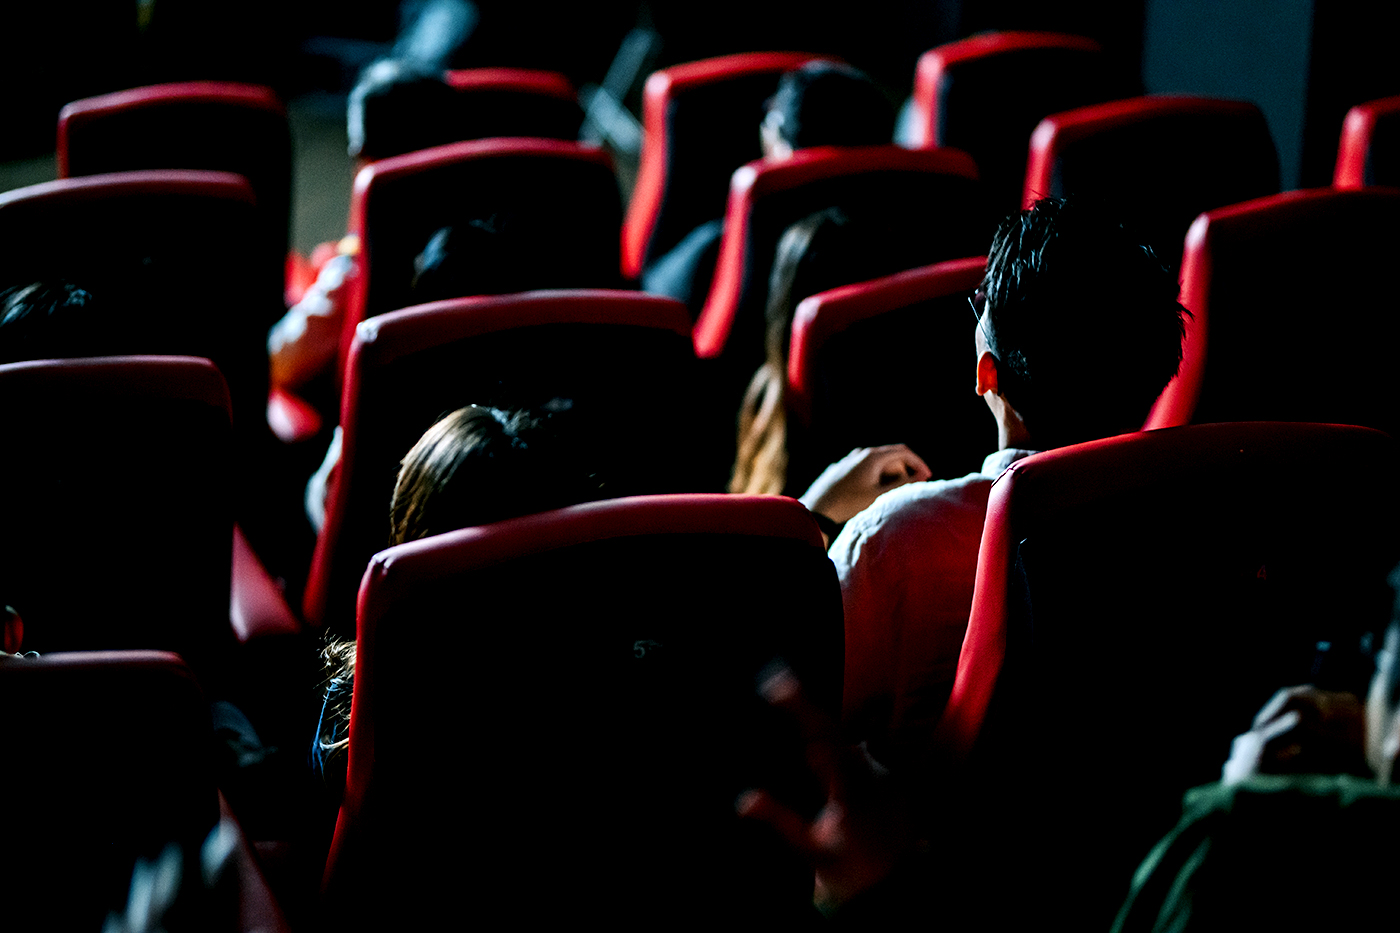 Seeing Just One Movie in the Theater Could Damage Your Hearing